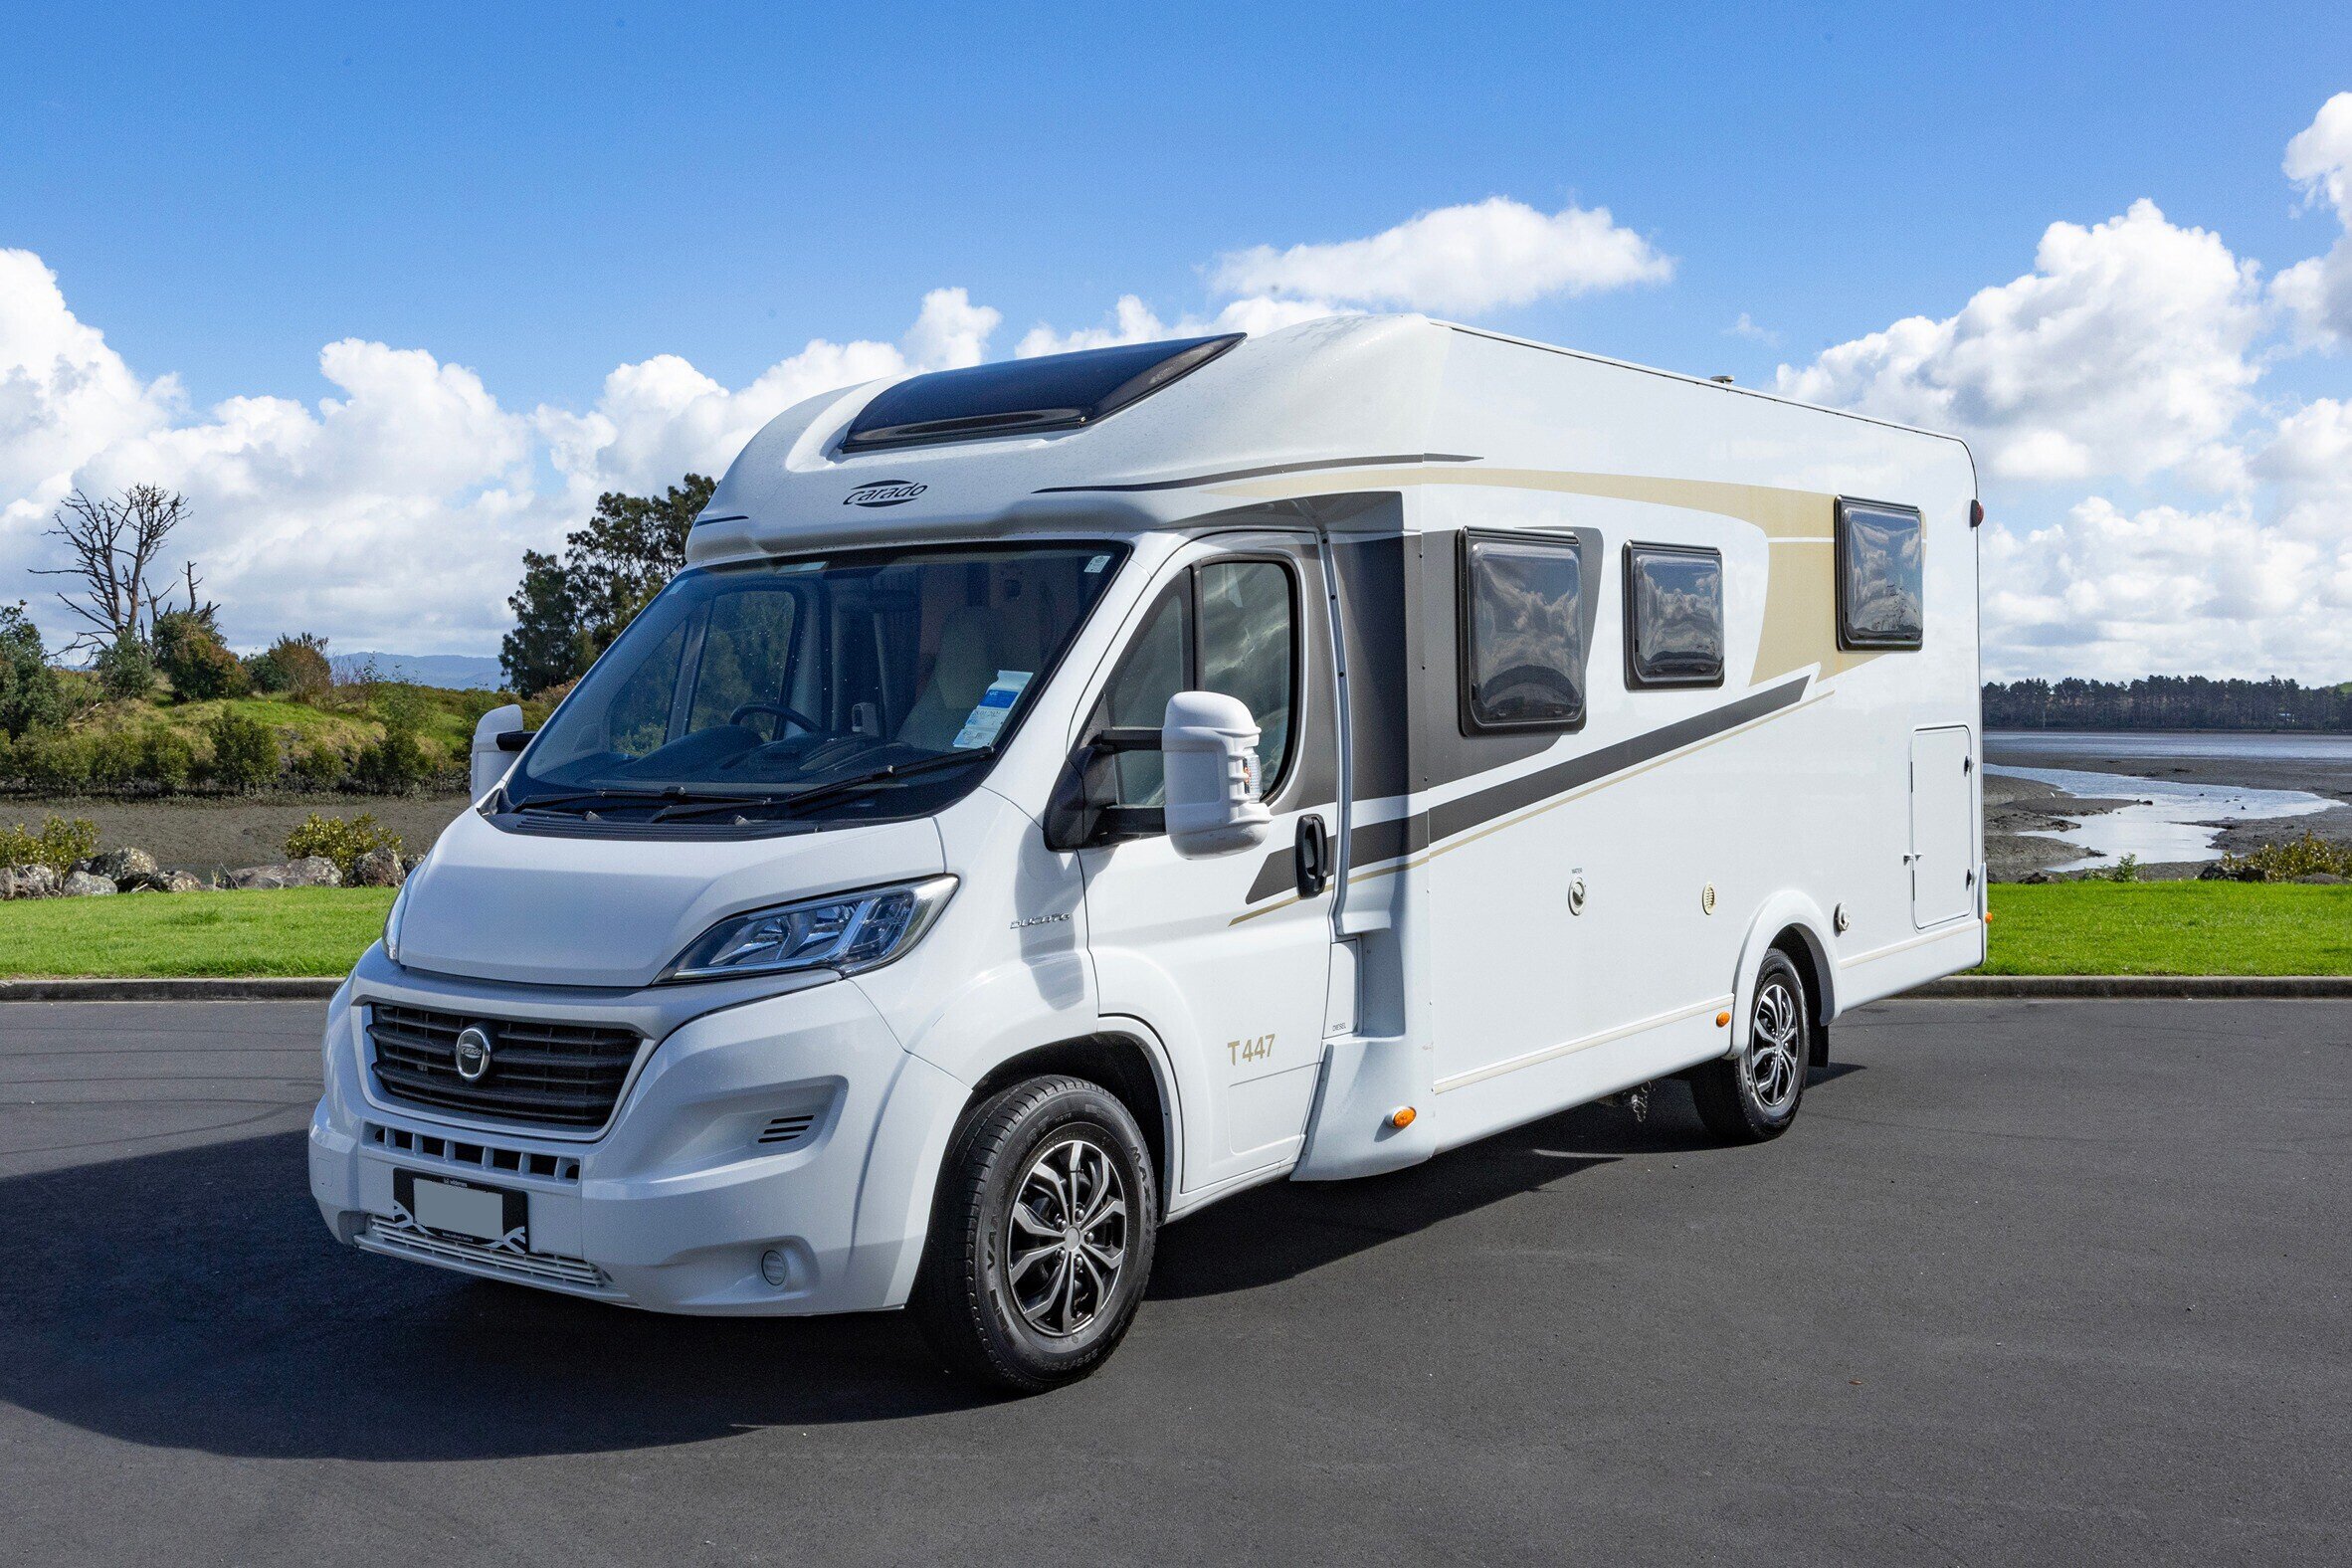 Wilderness 2019 Carado T447 motorhome front angle